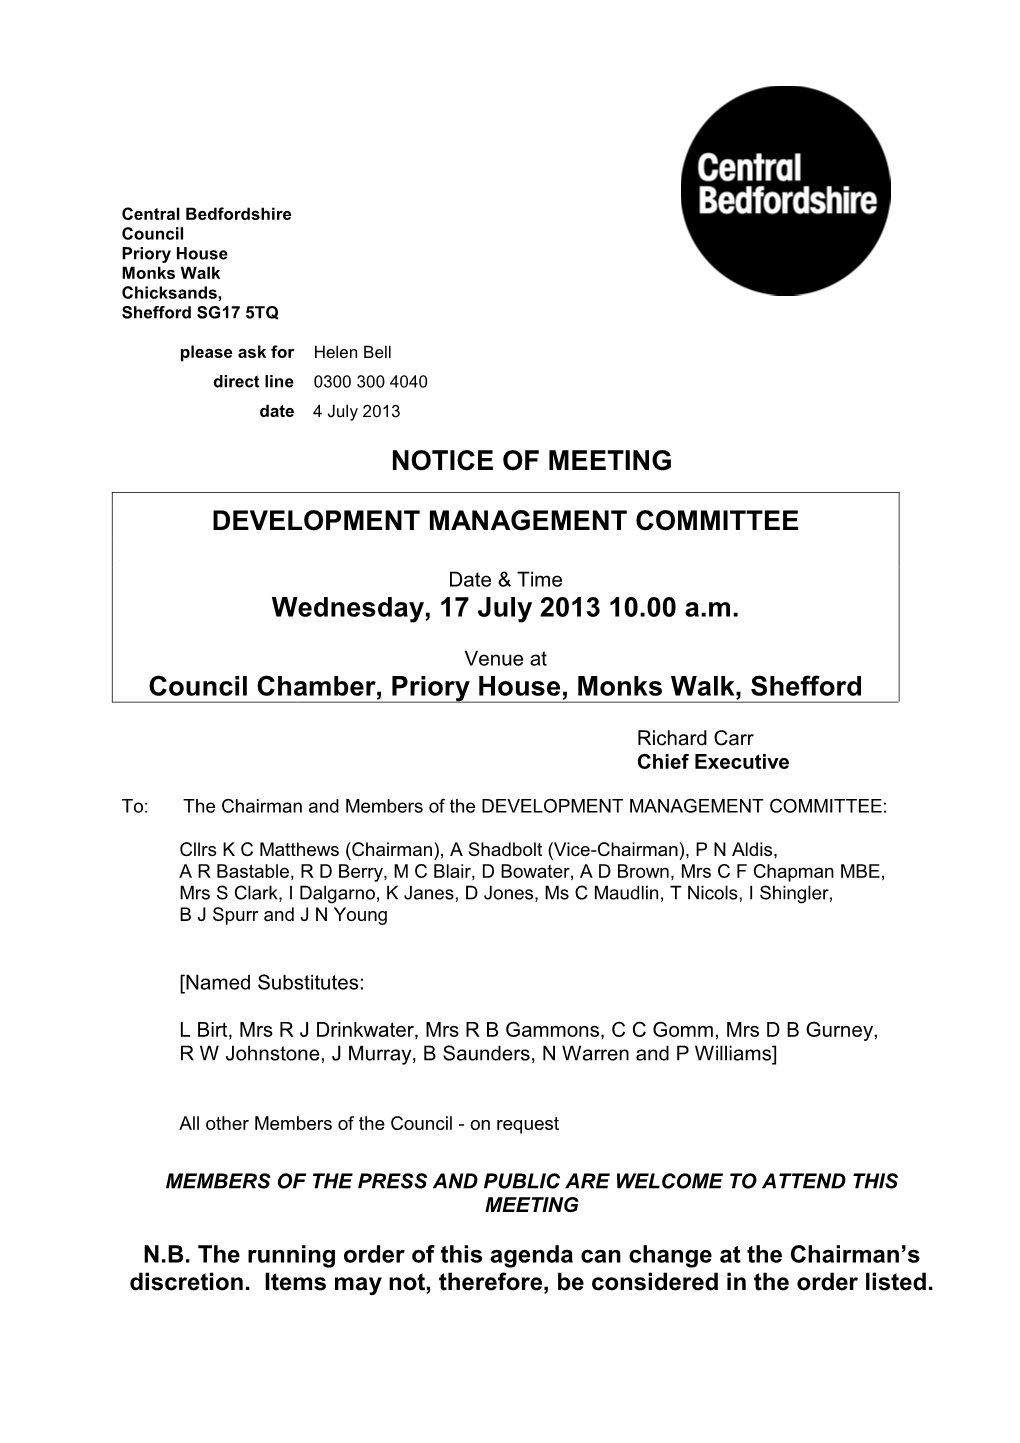 NOTICE of MEETING DEVELOPMENT MANAGEMENT COMMITTEE Wednesday, 17 July 2013 10.00 Am Council Chamber, Priory House, Monks Walk